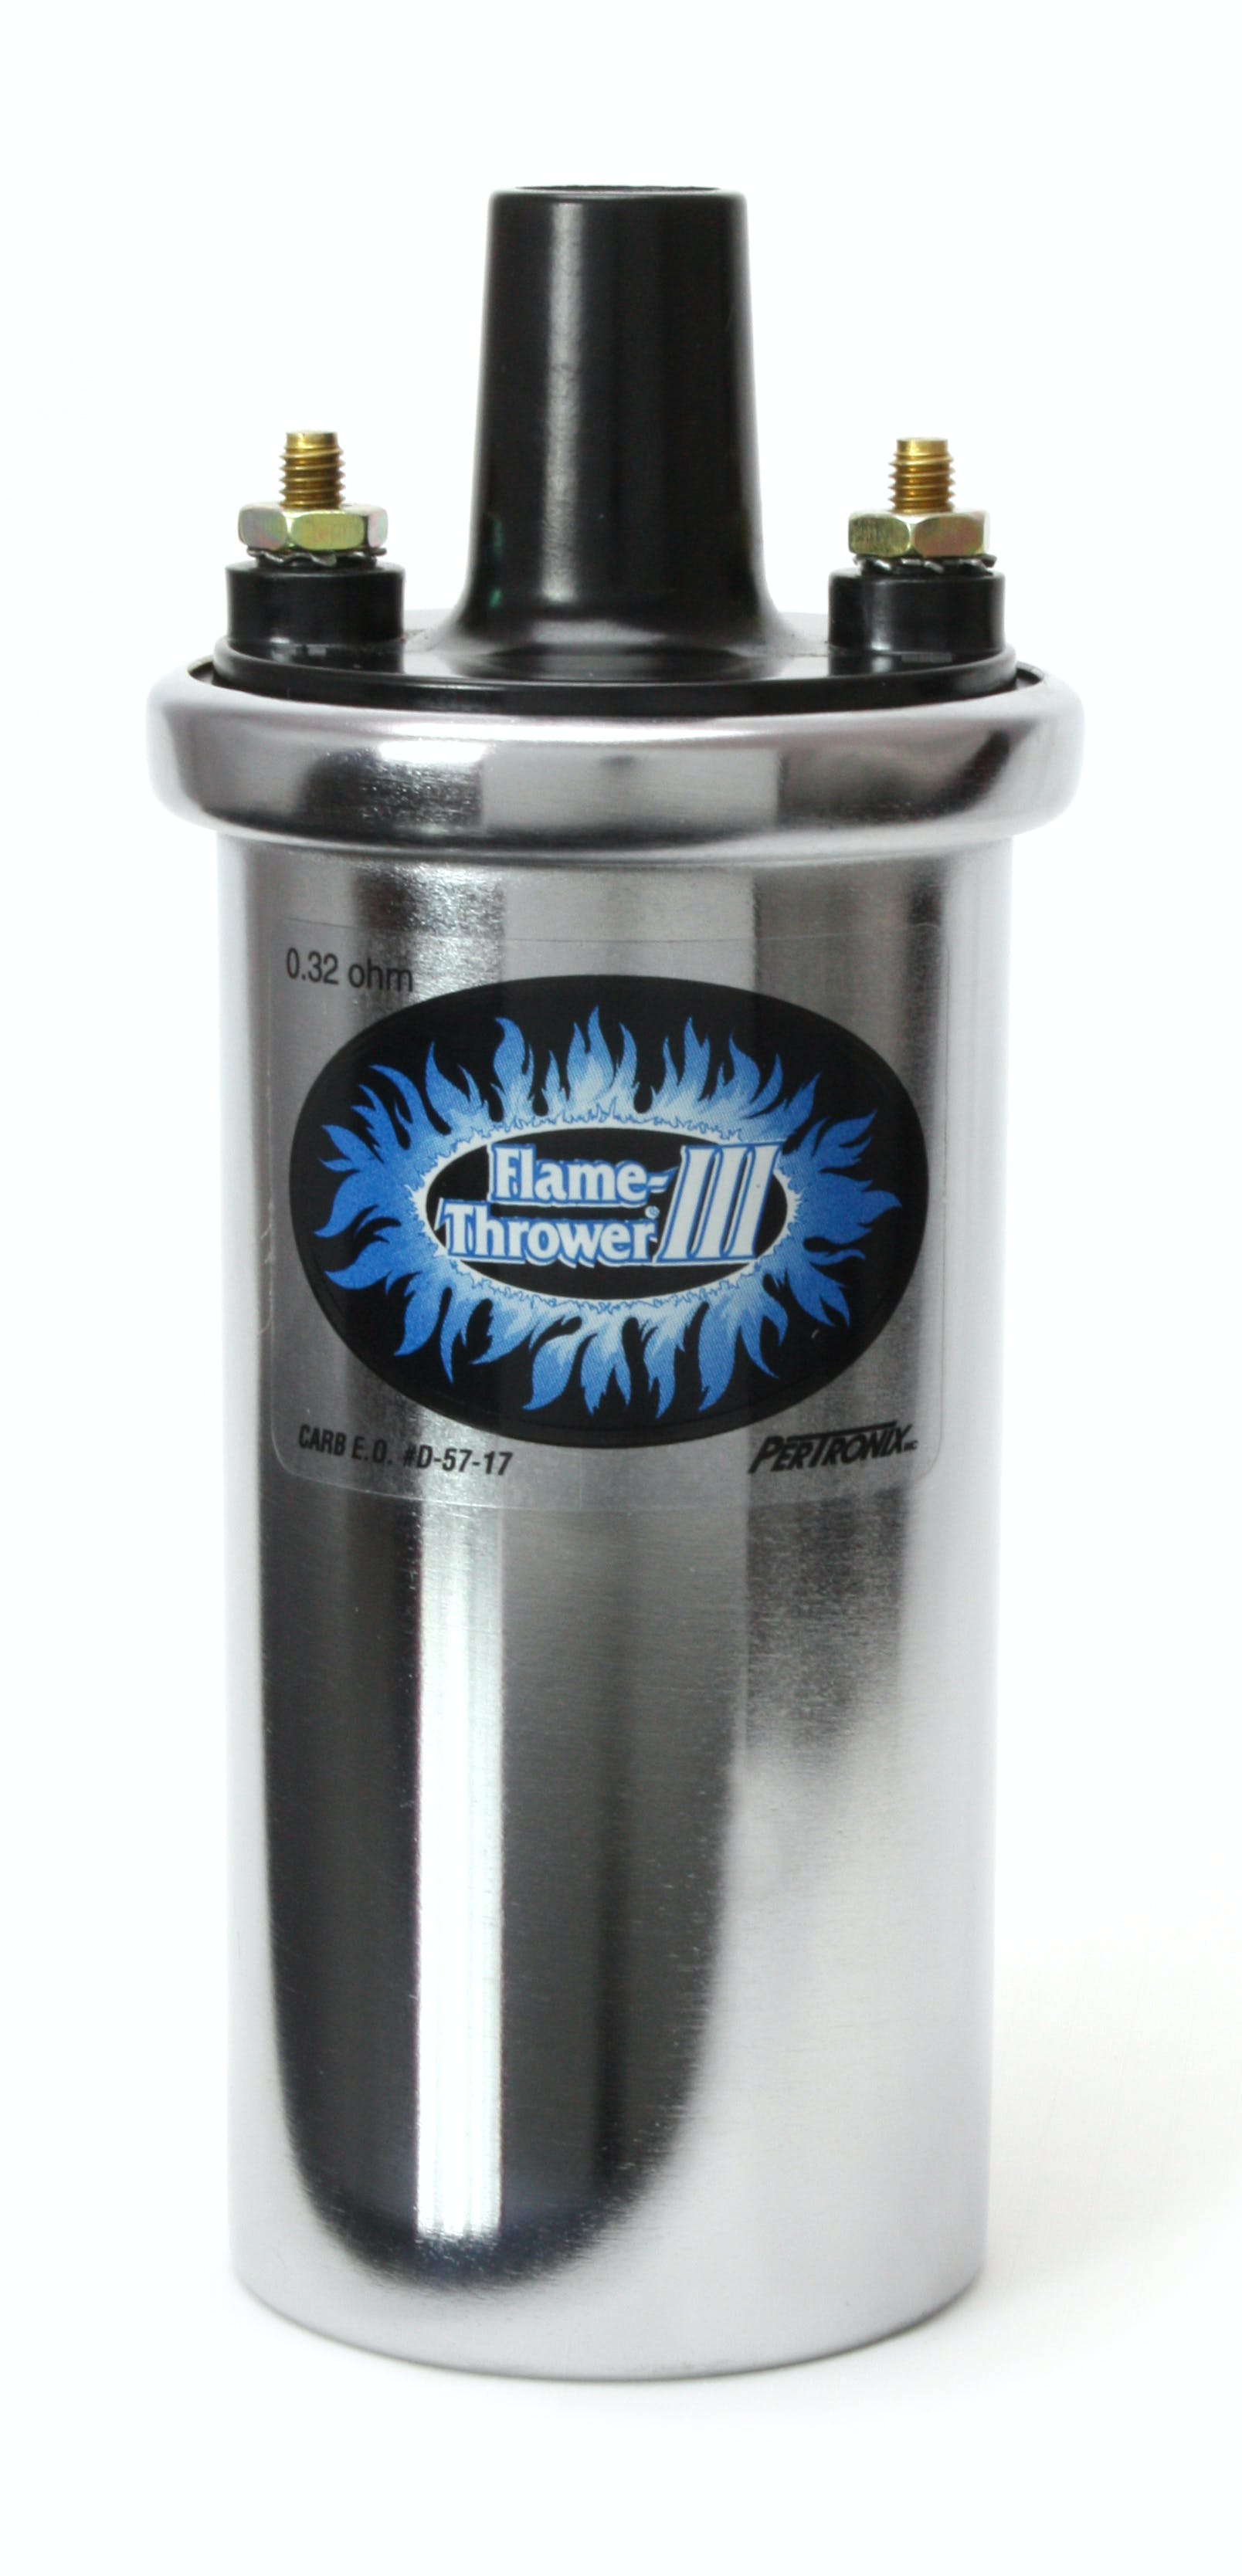 PerTronix 44001 PerTronix 44001 Flame-Thrower III Coil 45,000 Volt 0.32 ohm Chrome